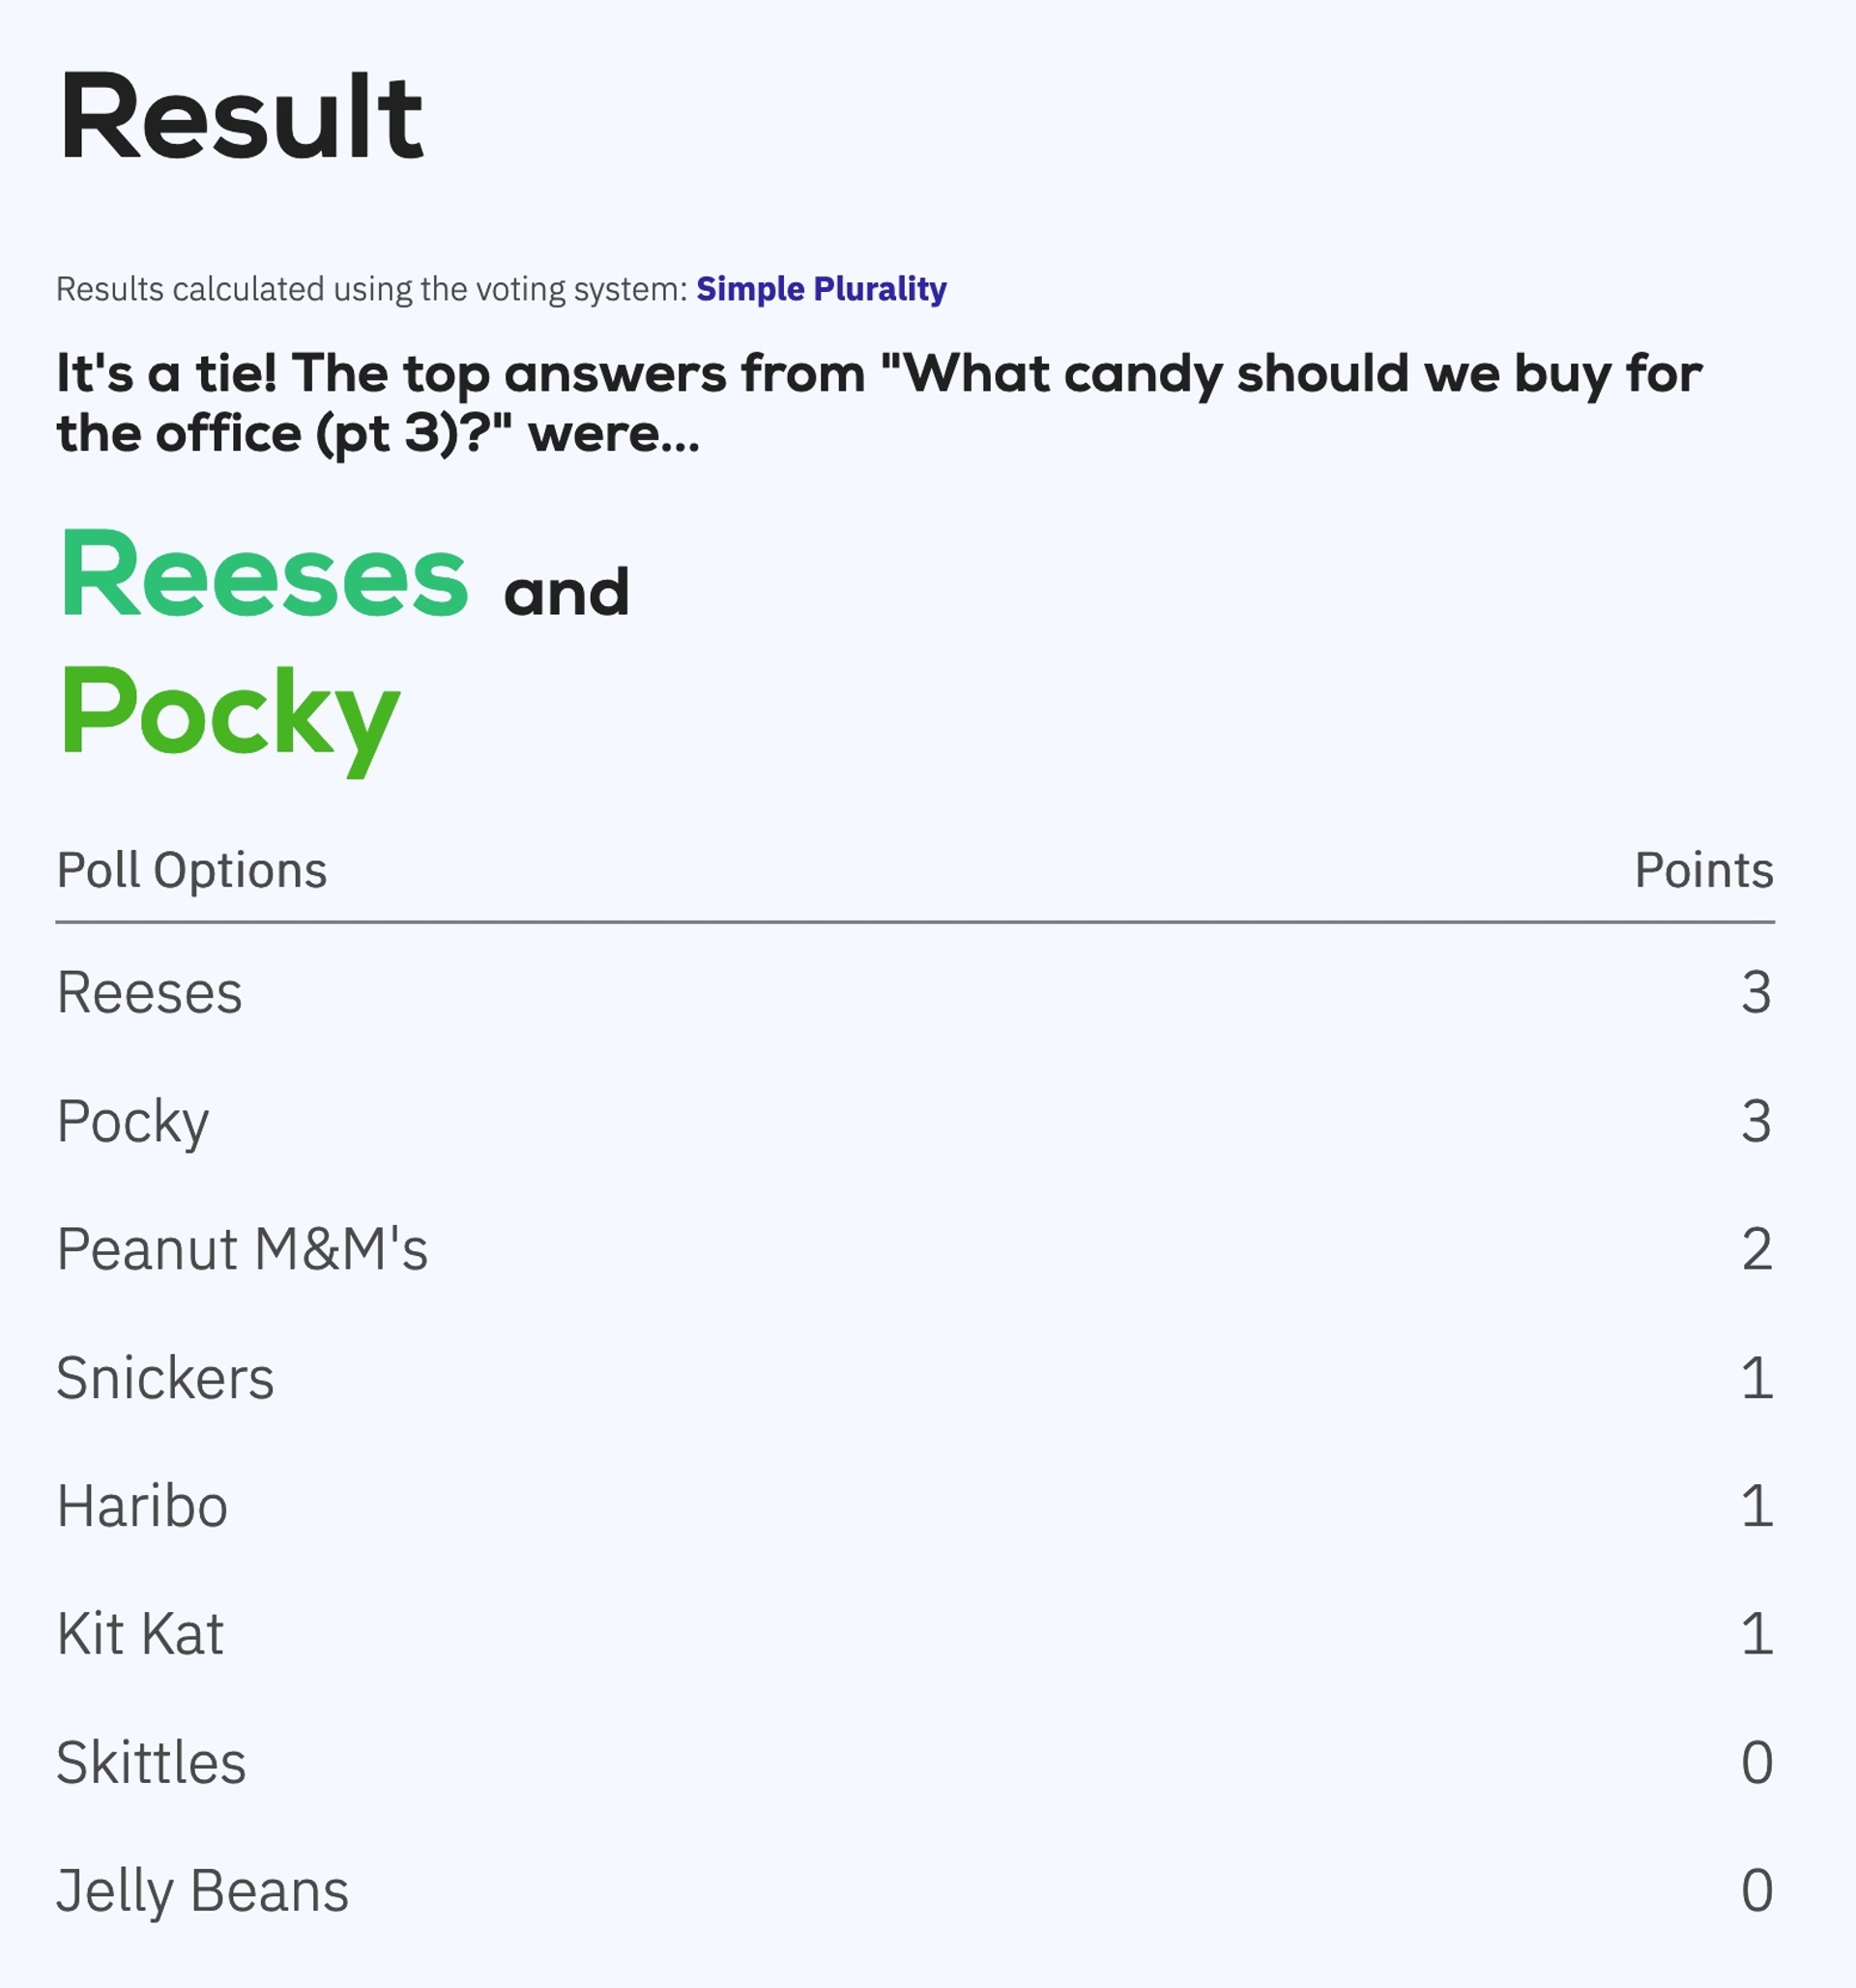 The results of the simple plurality voting system, revealing it to be a tie between Reeses and Pocky.